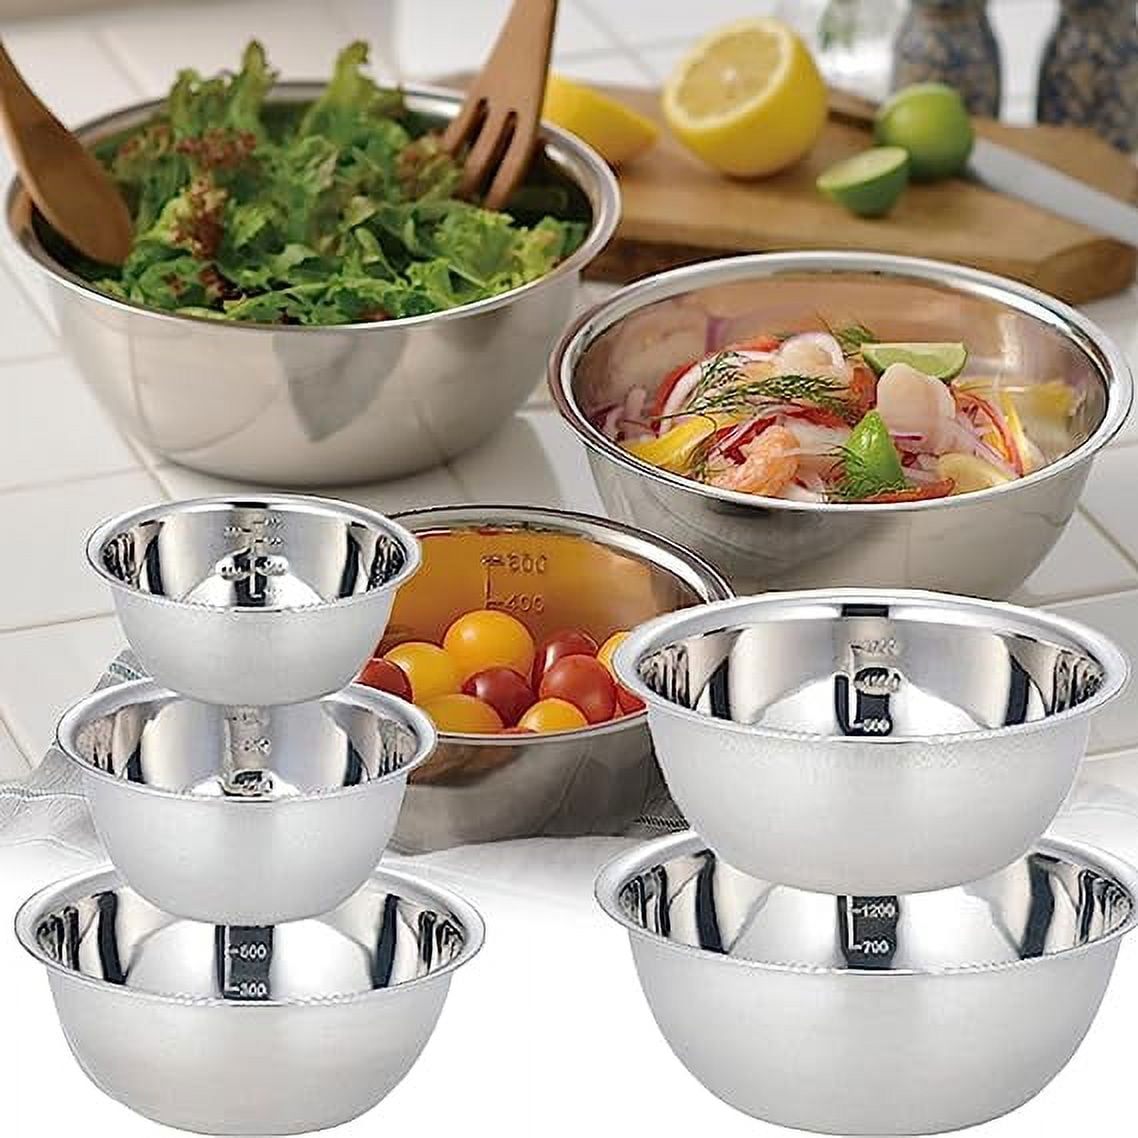 TINANA Mixing Bowls Set, Set of 6, Stainless Steel Mixing Bowls, Metal  Nesting Storage Bowls for Kitchen, Size 8, 5, 4, 3, 1.5, 0.75 QT, Great for  Prep, Baking, Serving-Gray 